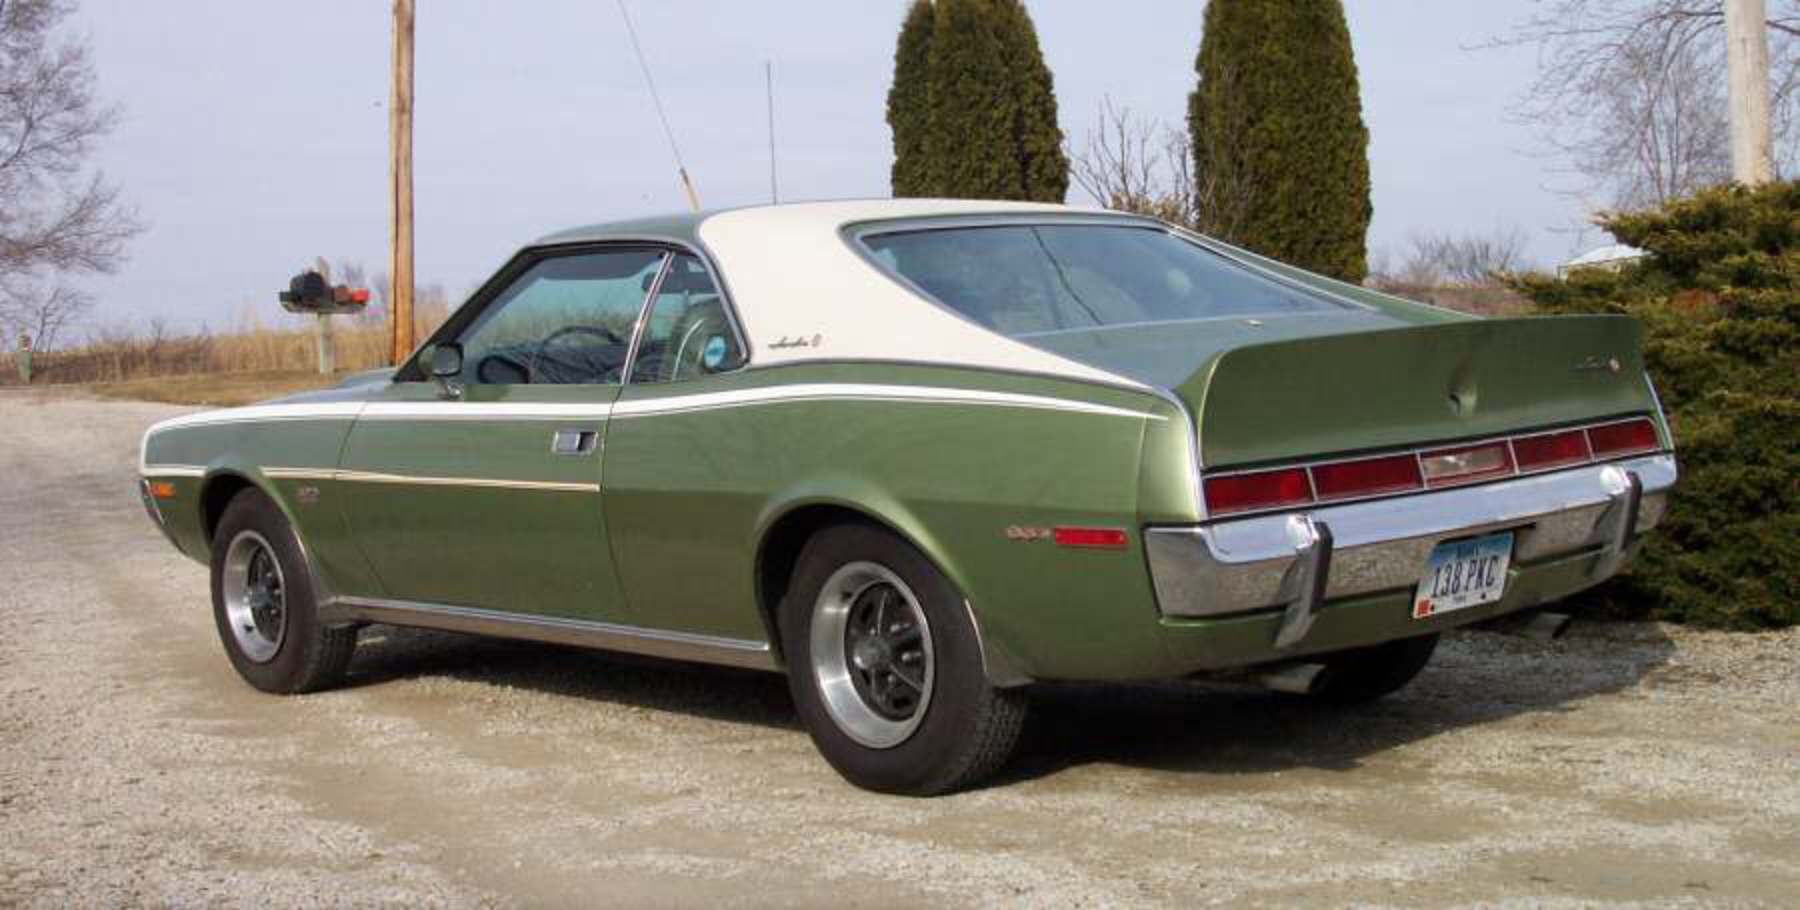 New toy in the collection, here are some photos of a 1970 AMC Javelin SST I